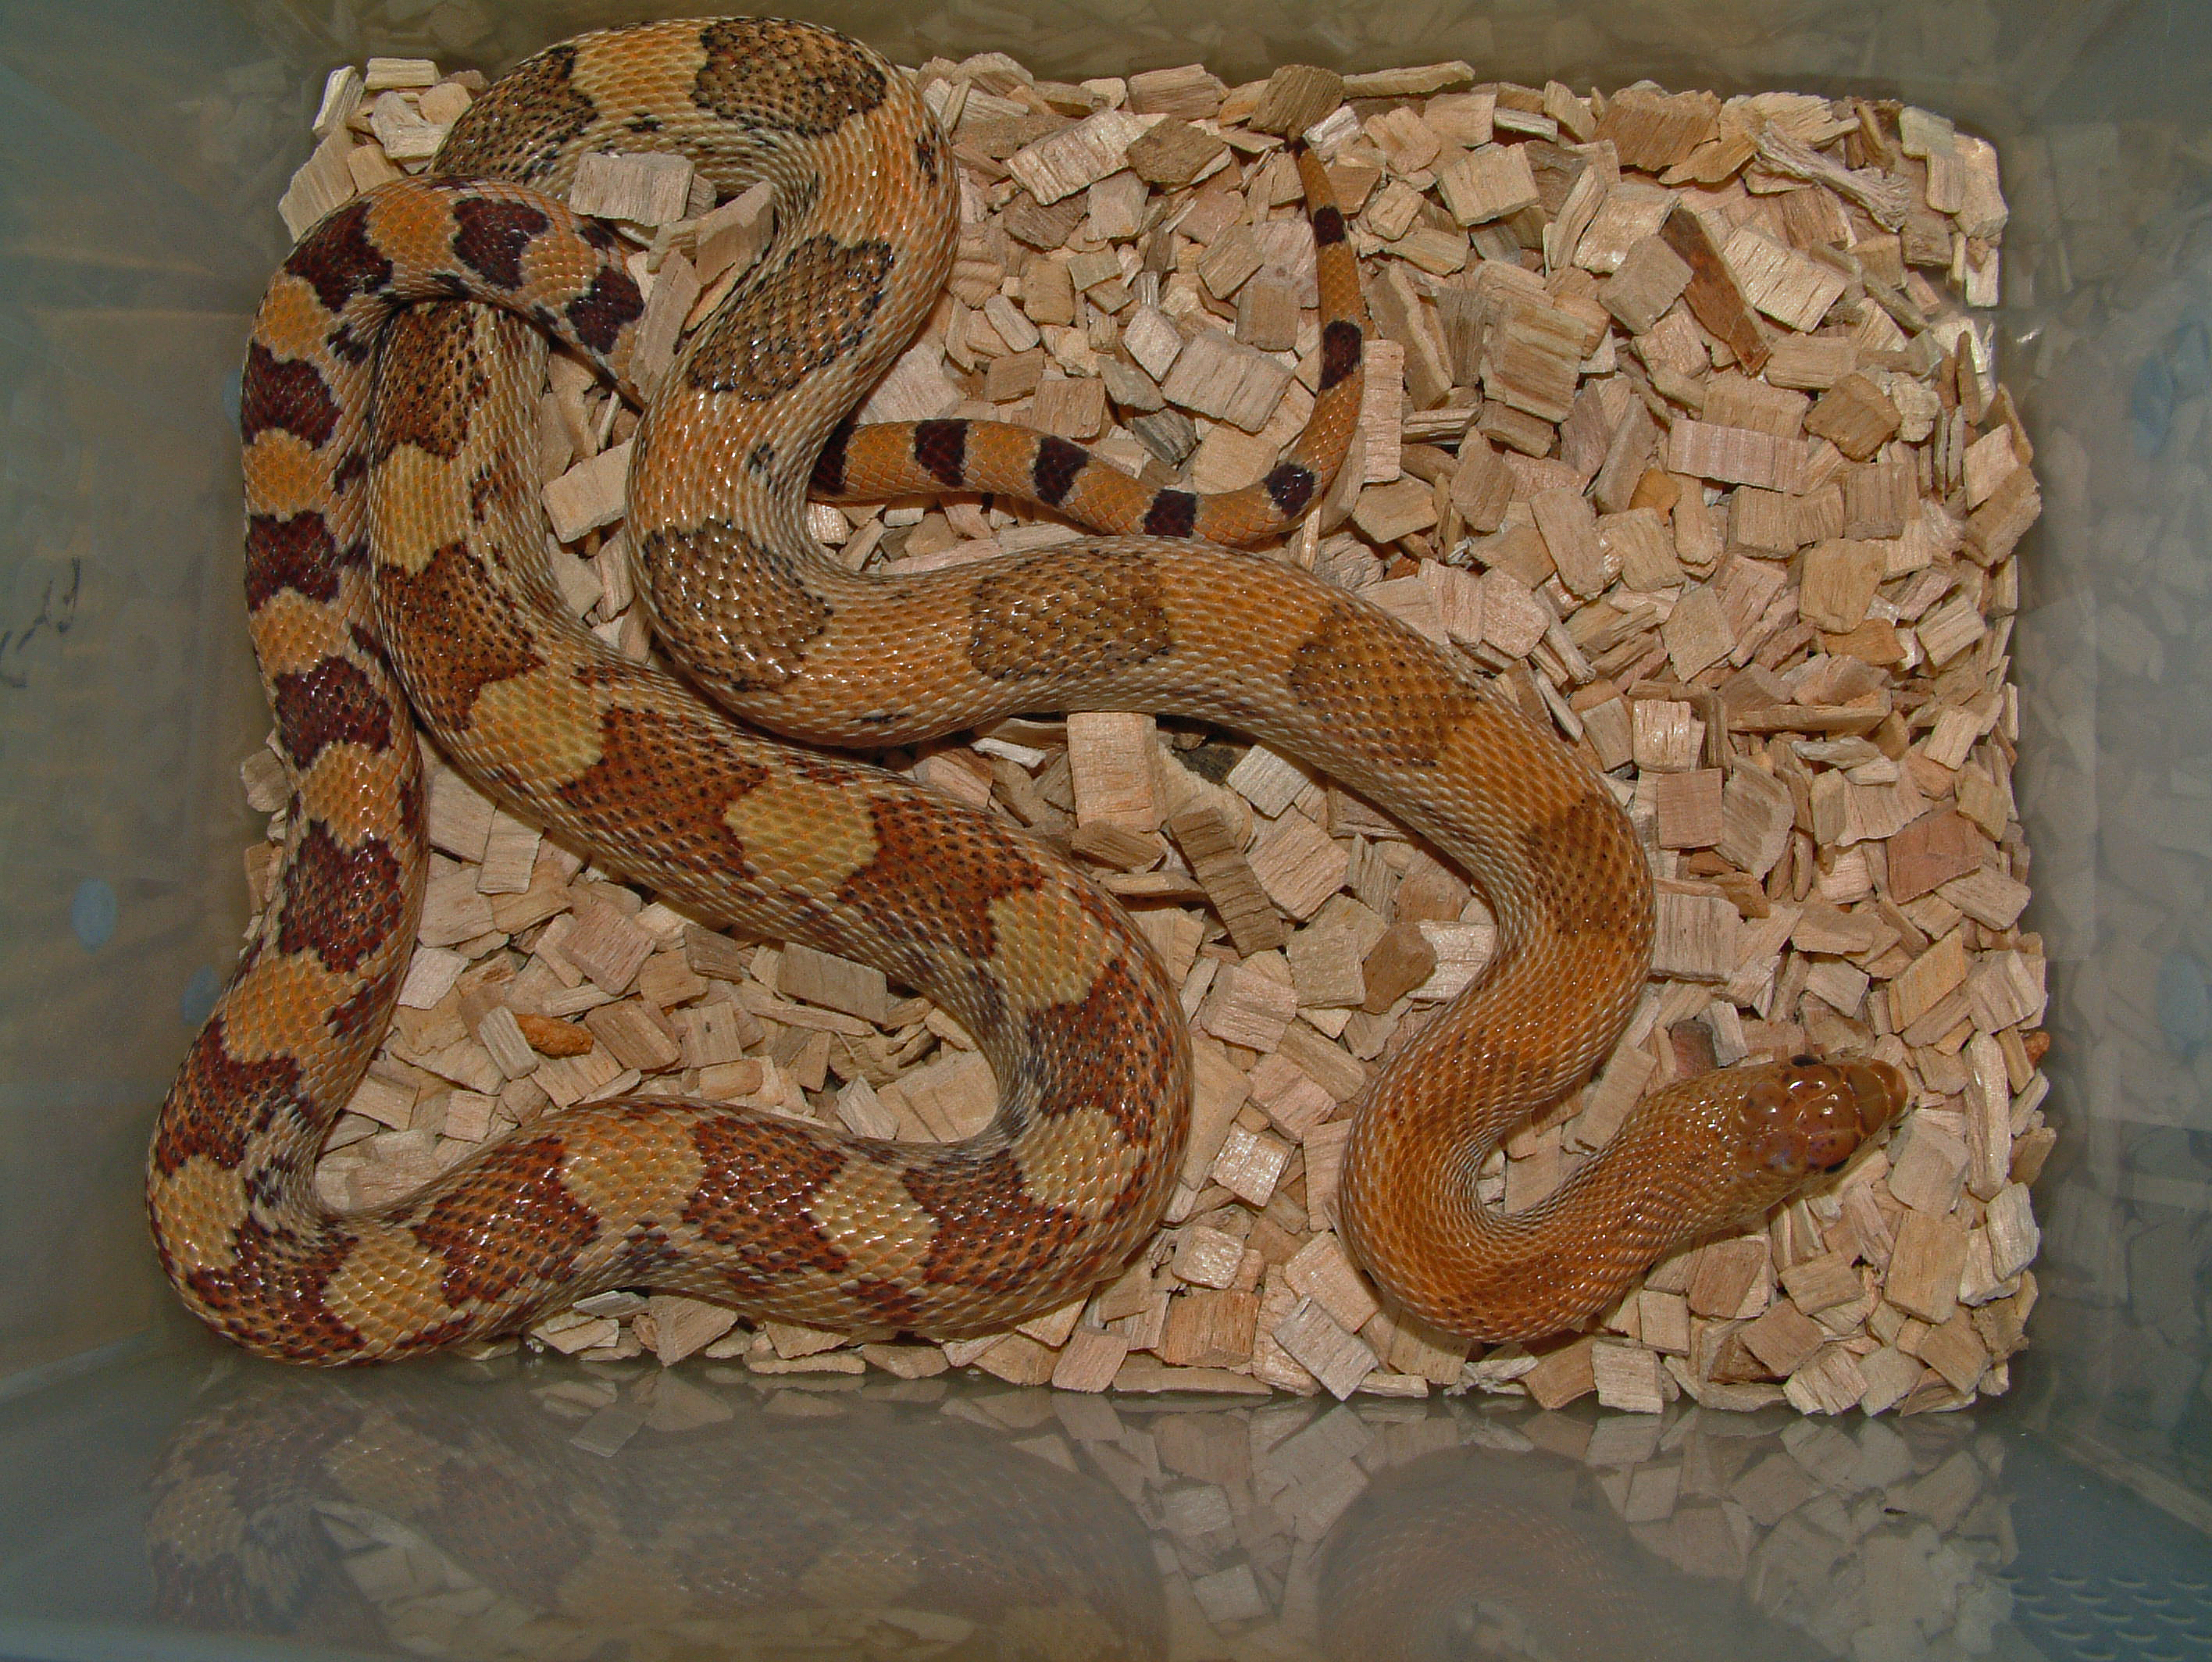 pituophis deppei jani 9 (2)